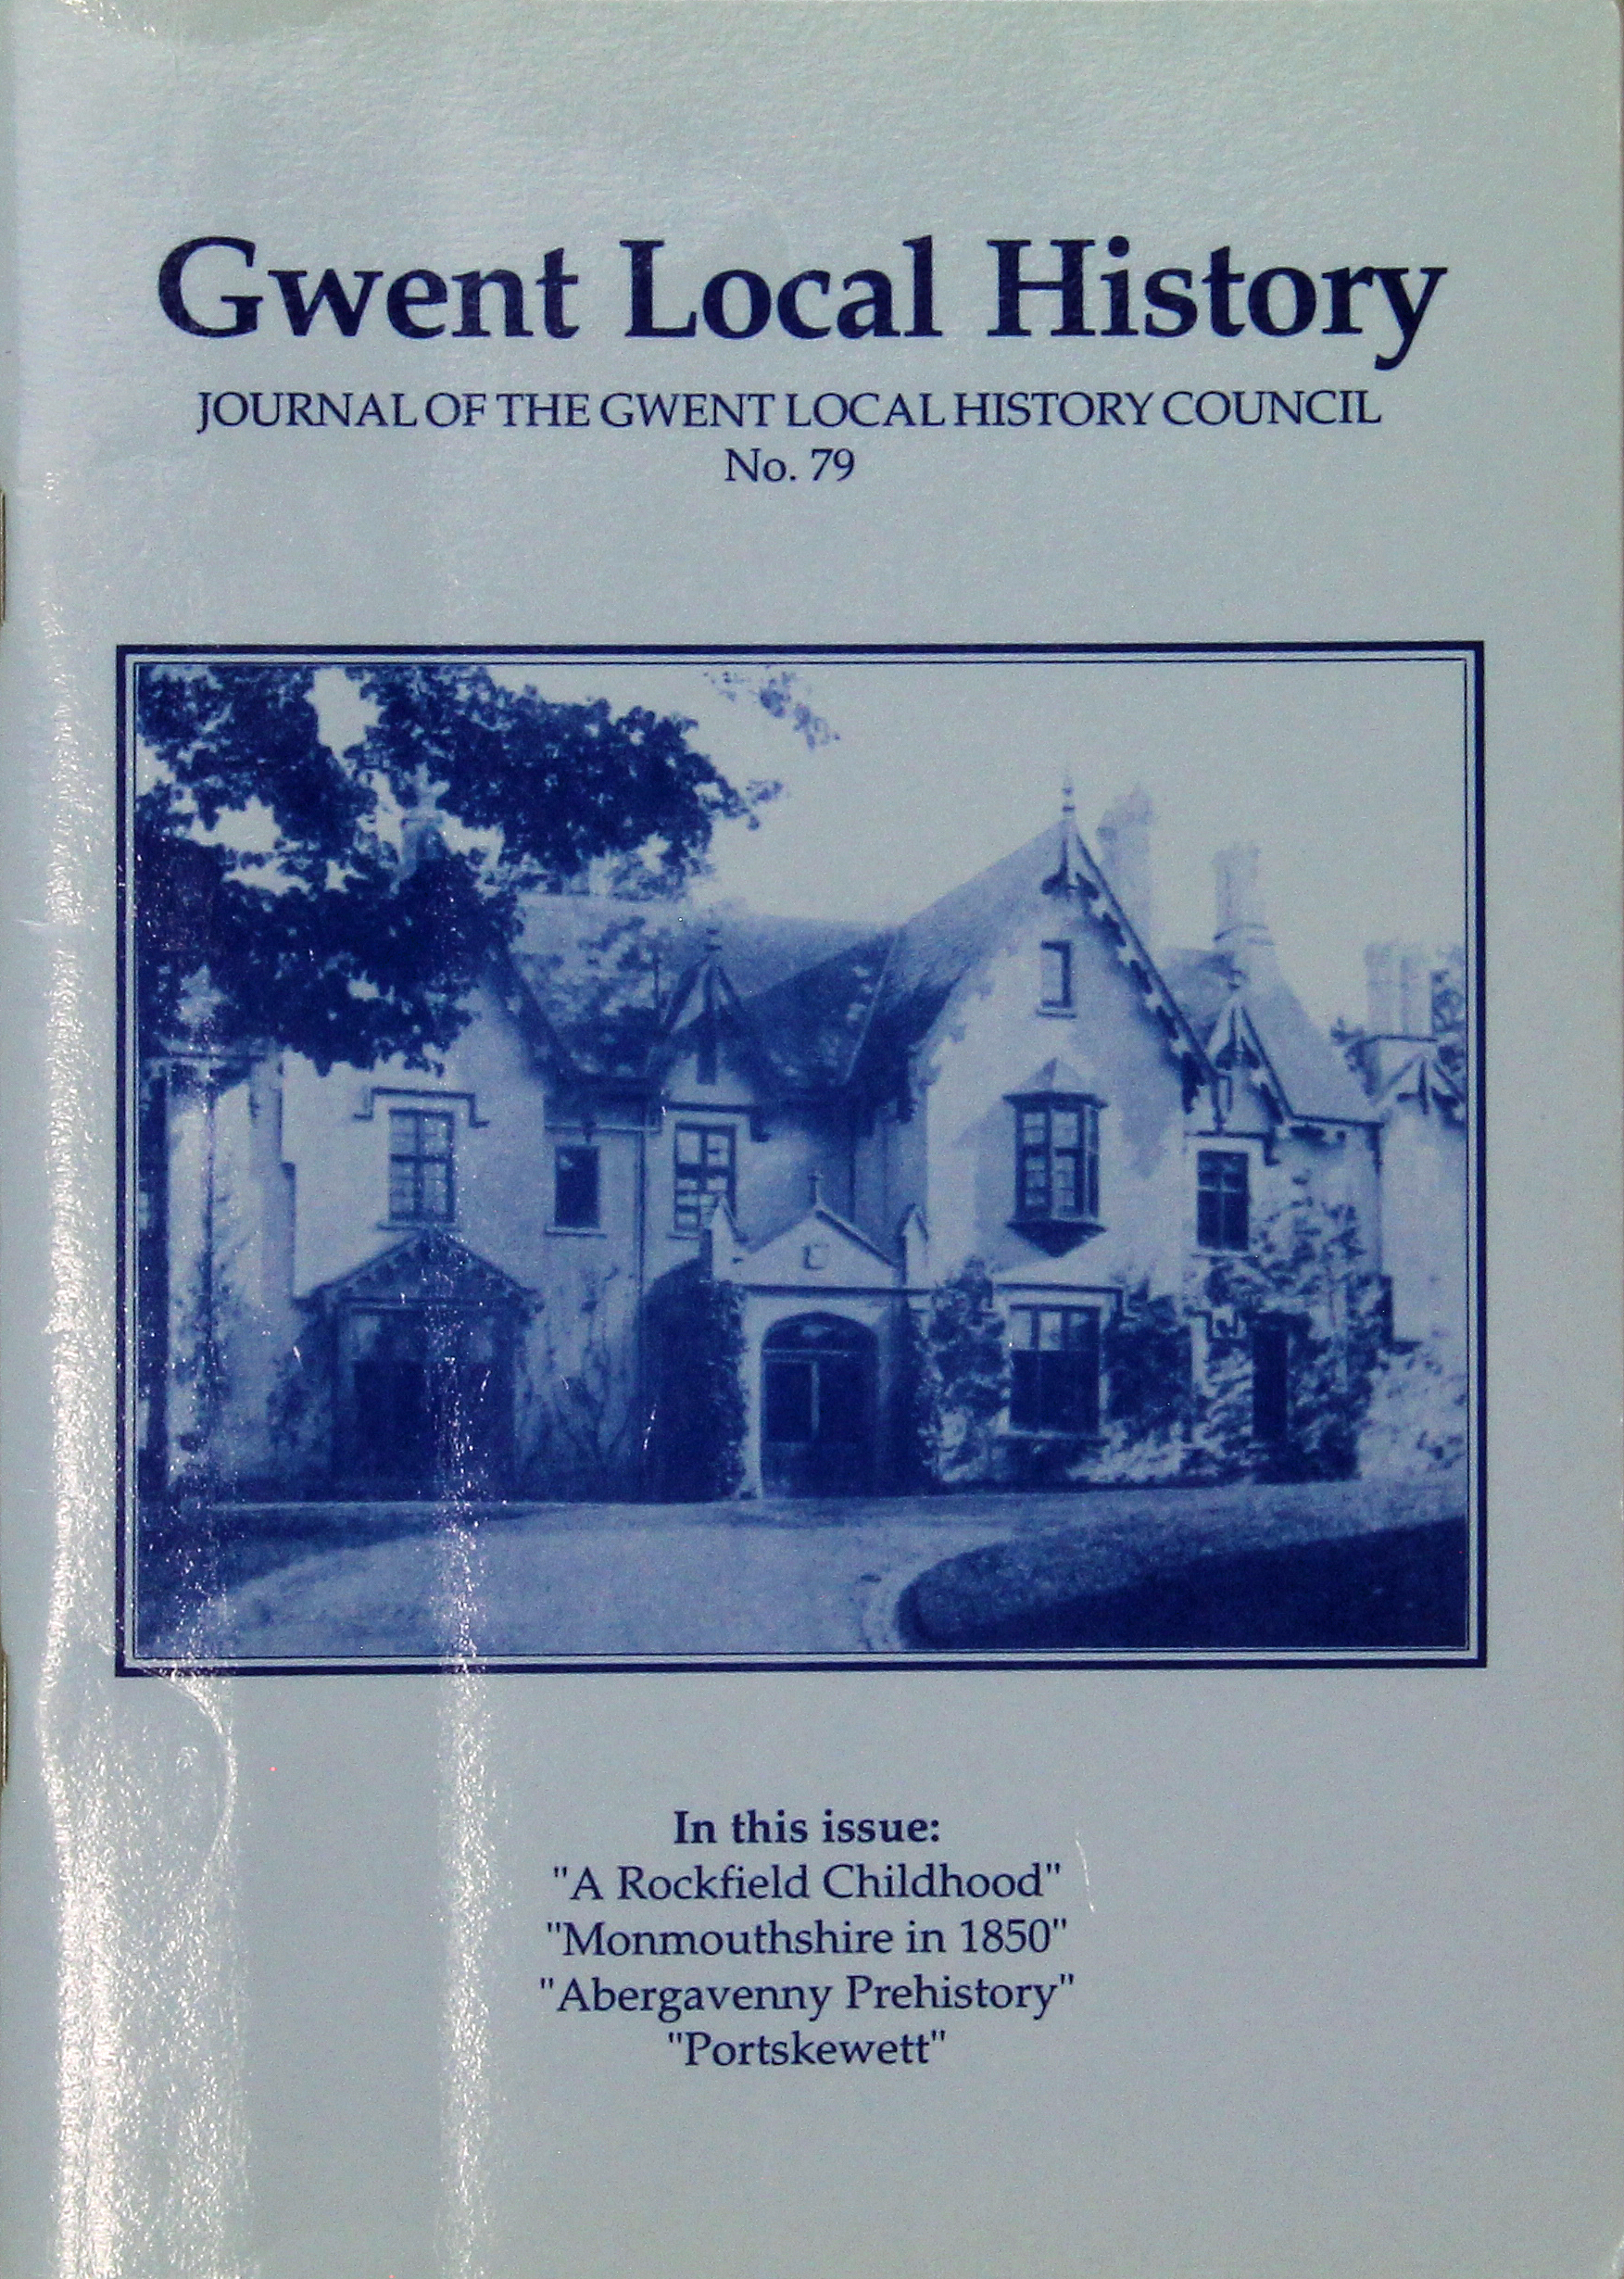 Gwent Local History: Journal of the Gwent Local History Council No.79, Autumn 1995, £2.00